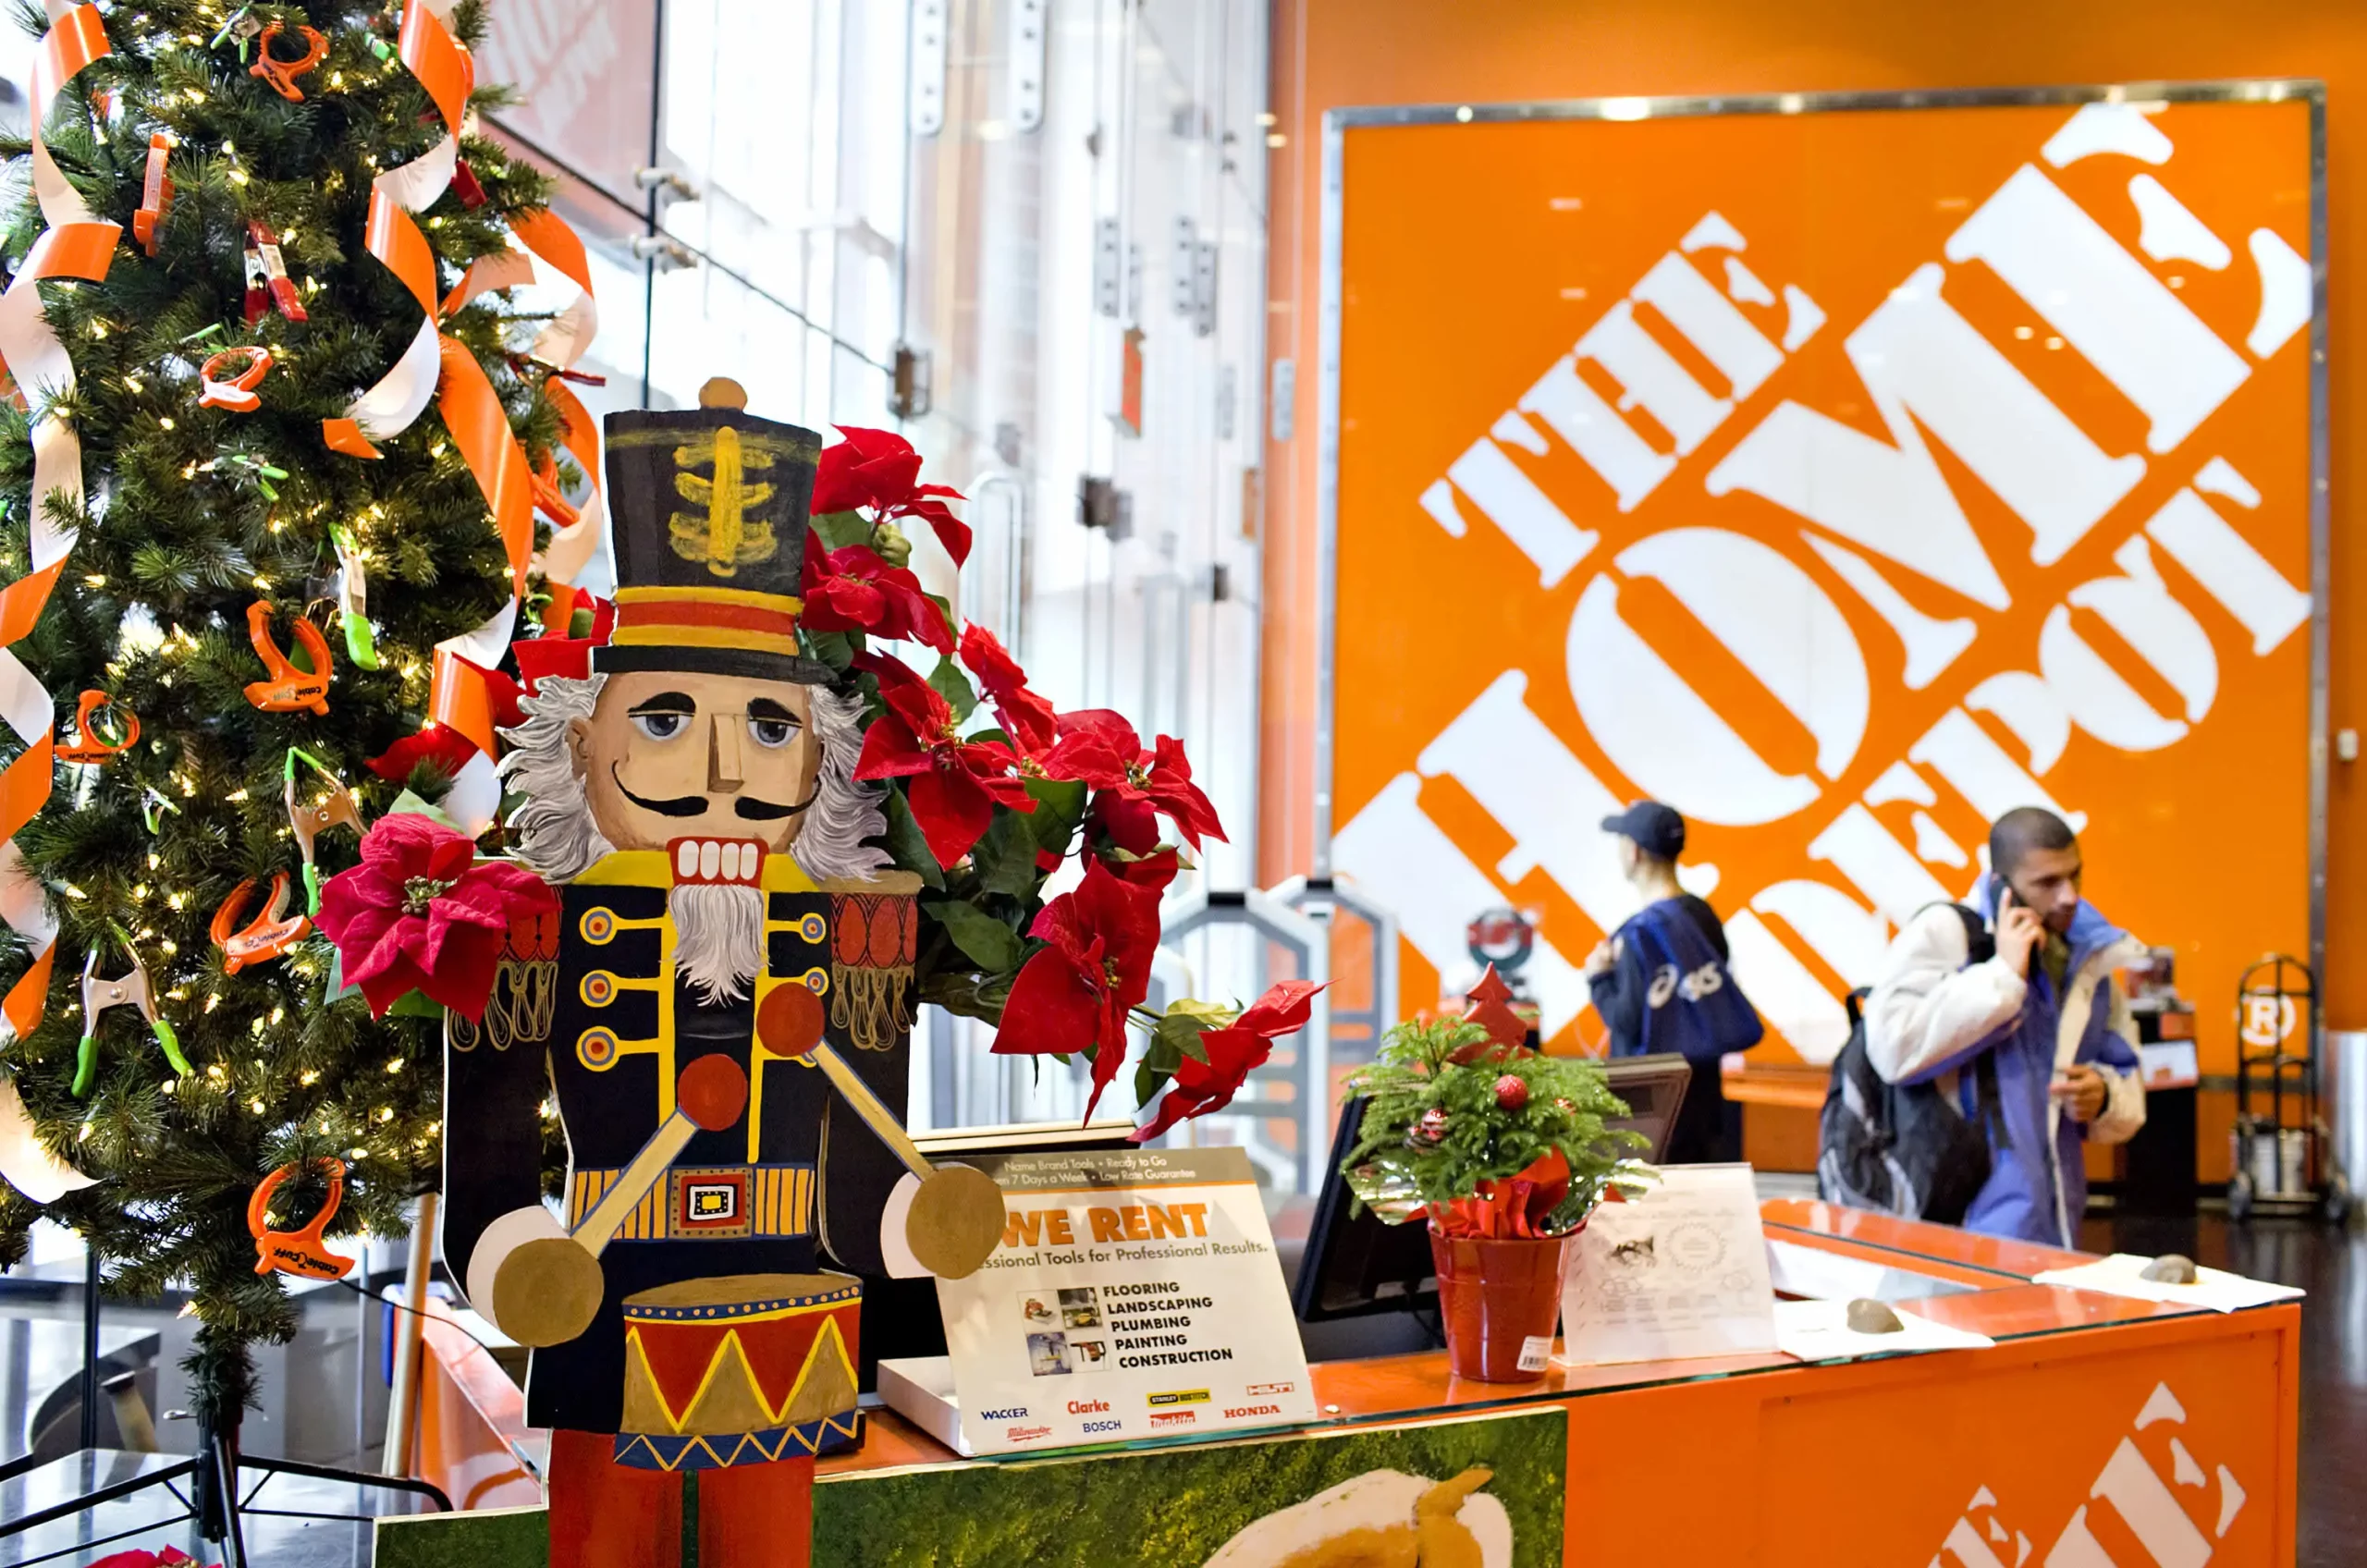 Does Home Depot Pay Early on Thanksgiving?